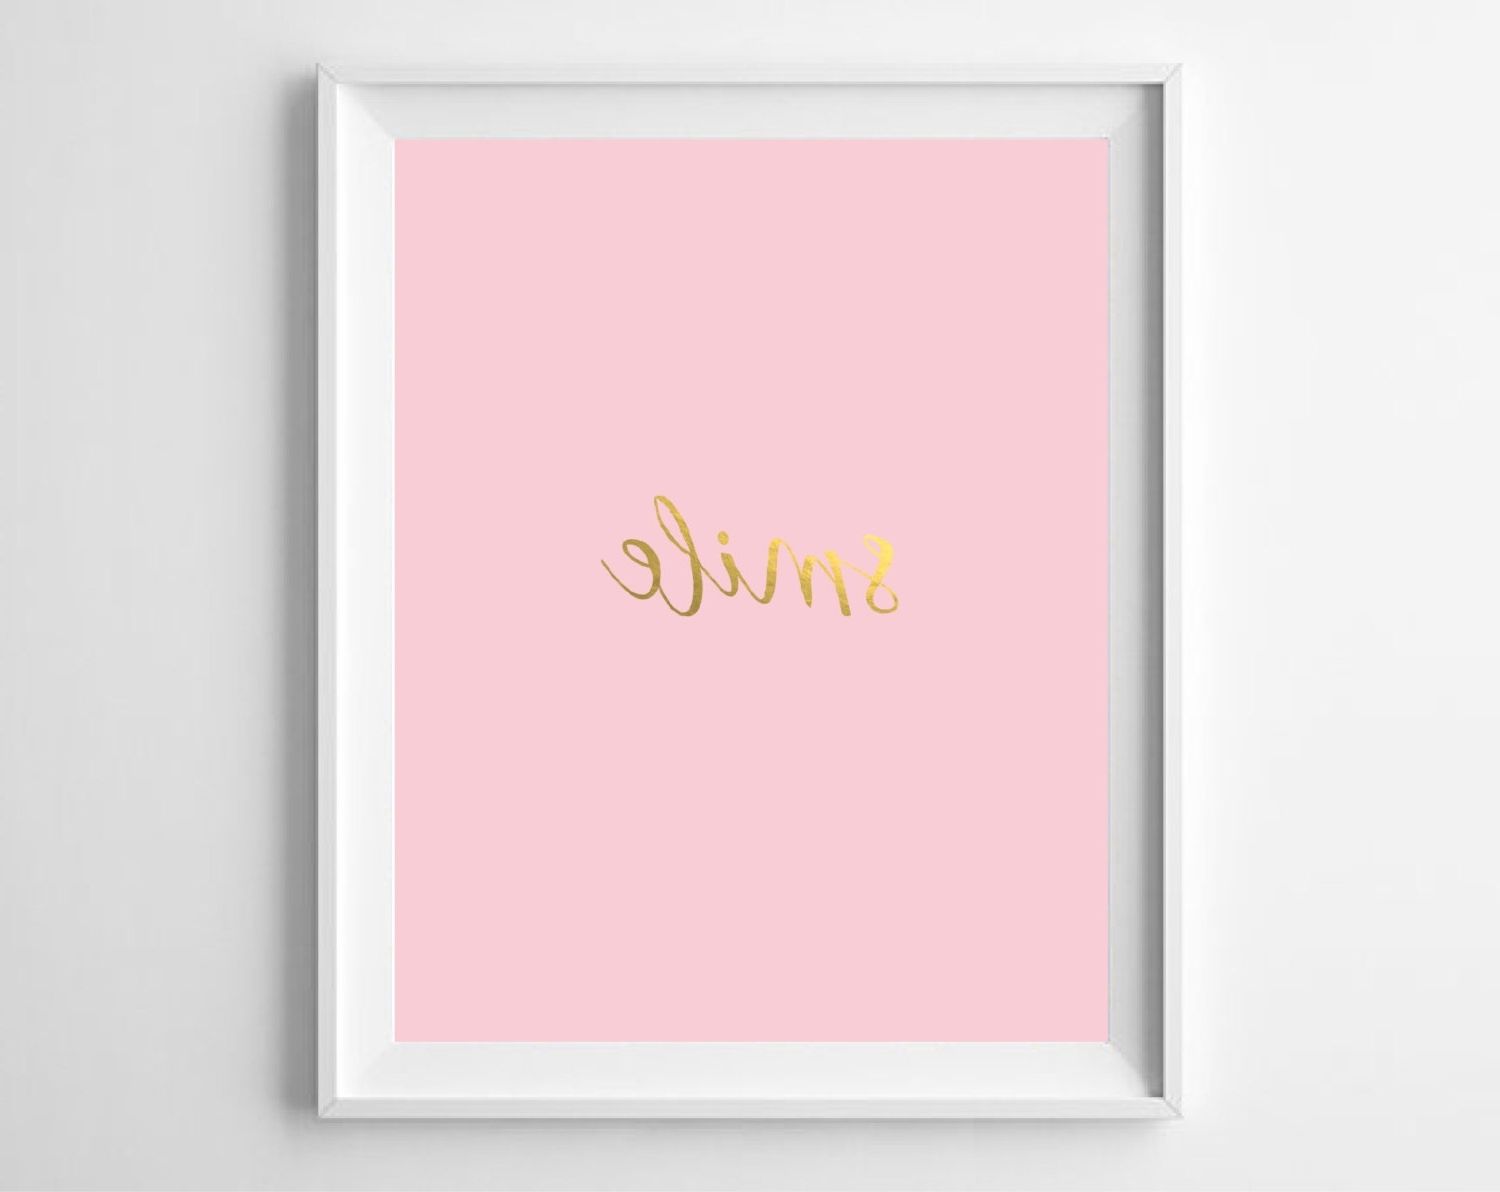 Well Liked Gold Wall Art With Smile Gold Foil Print Printable Blush Pink Gold Wall Art (View 4 of 15)